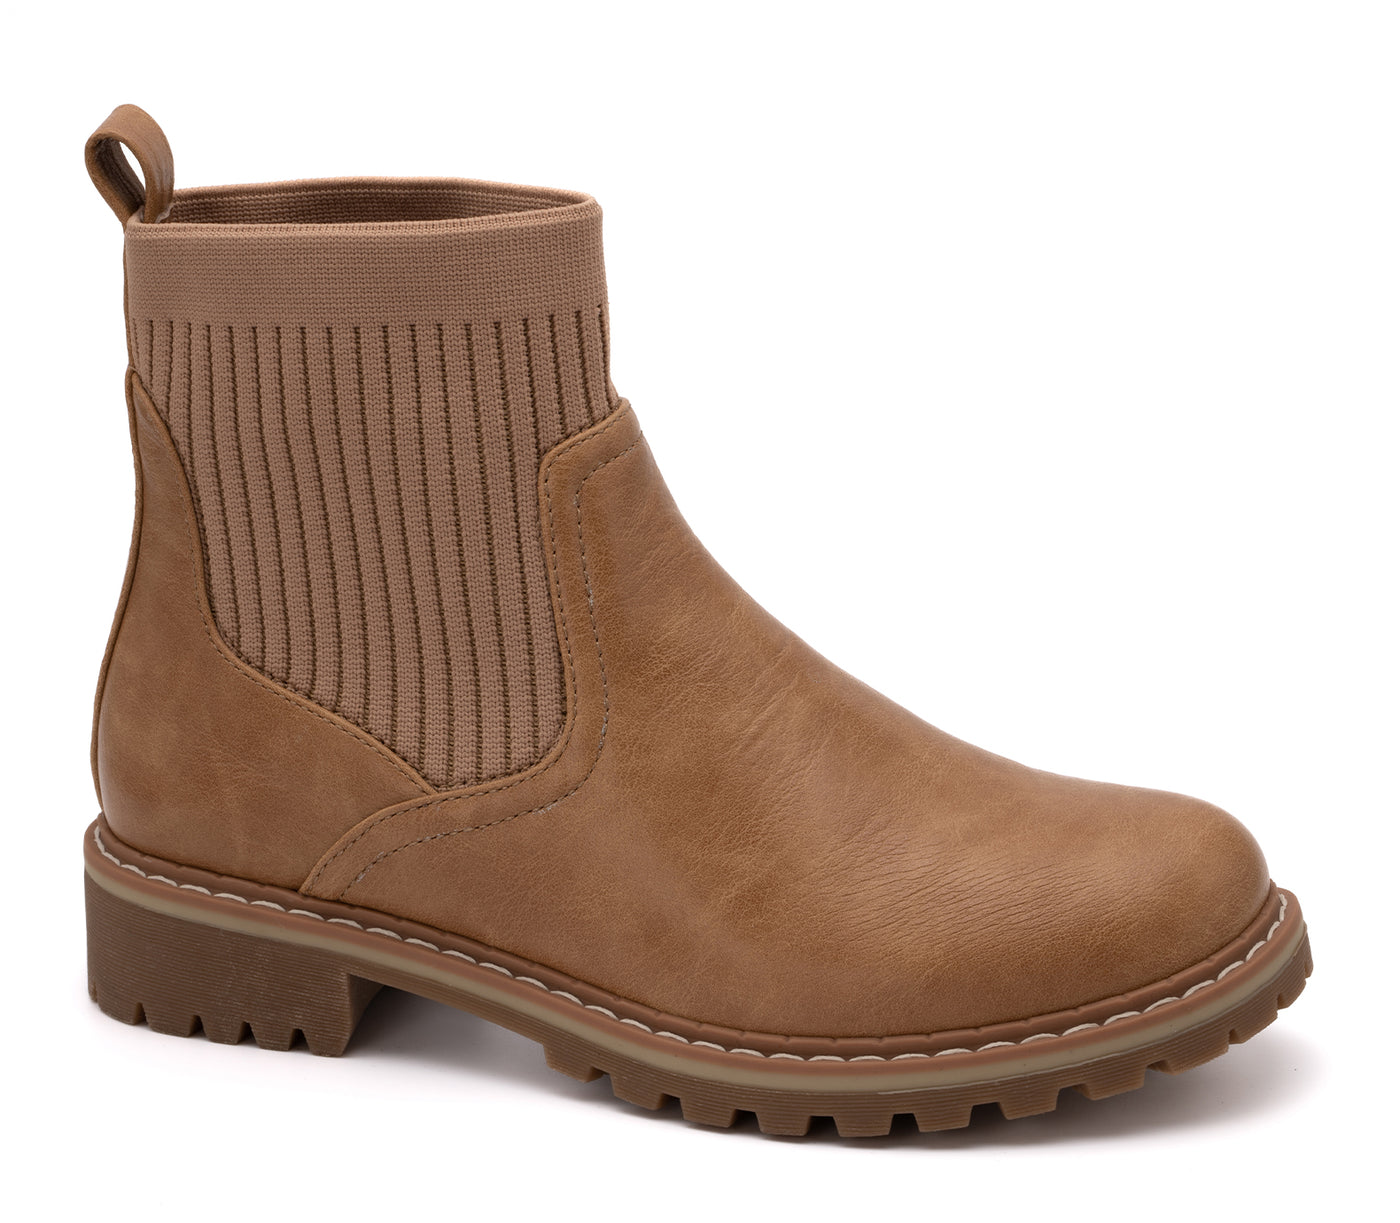 Corkys Cabin Fever Boots in Caramel Final Sale